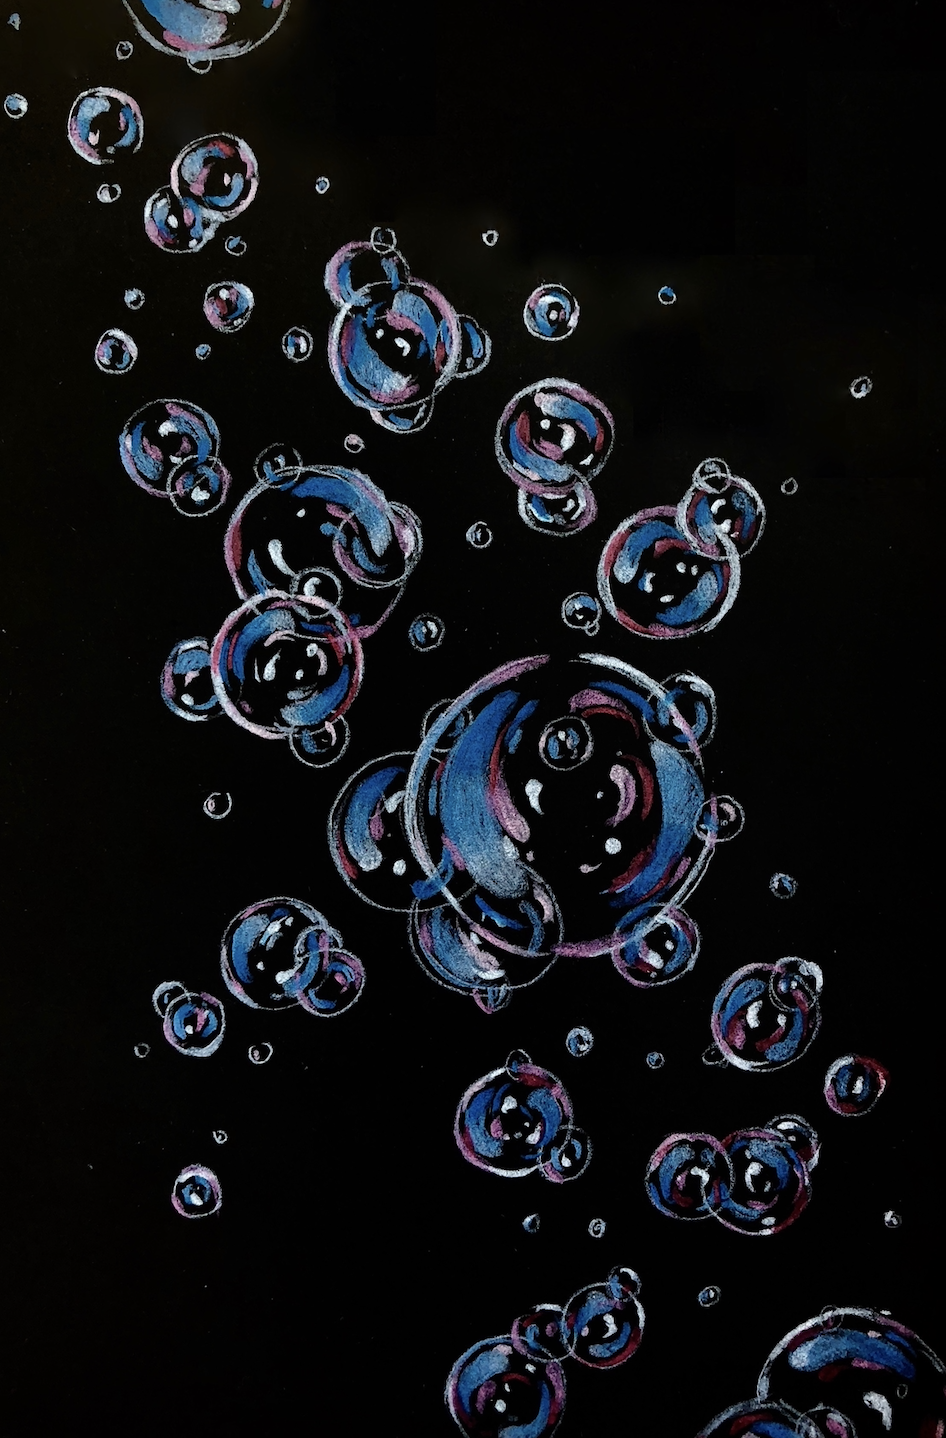 Drawing of bubbles against a black background.